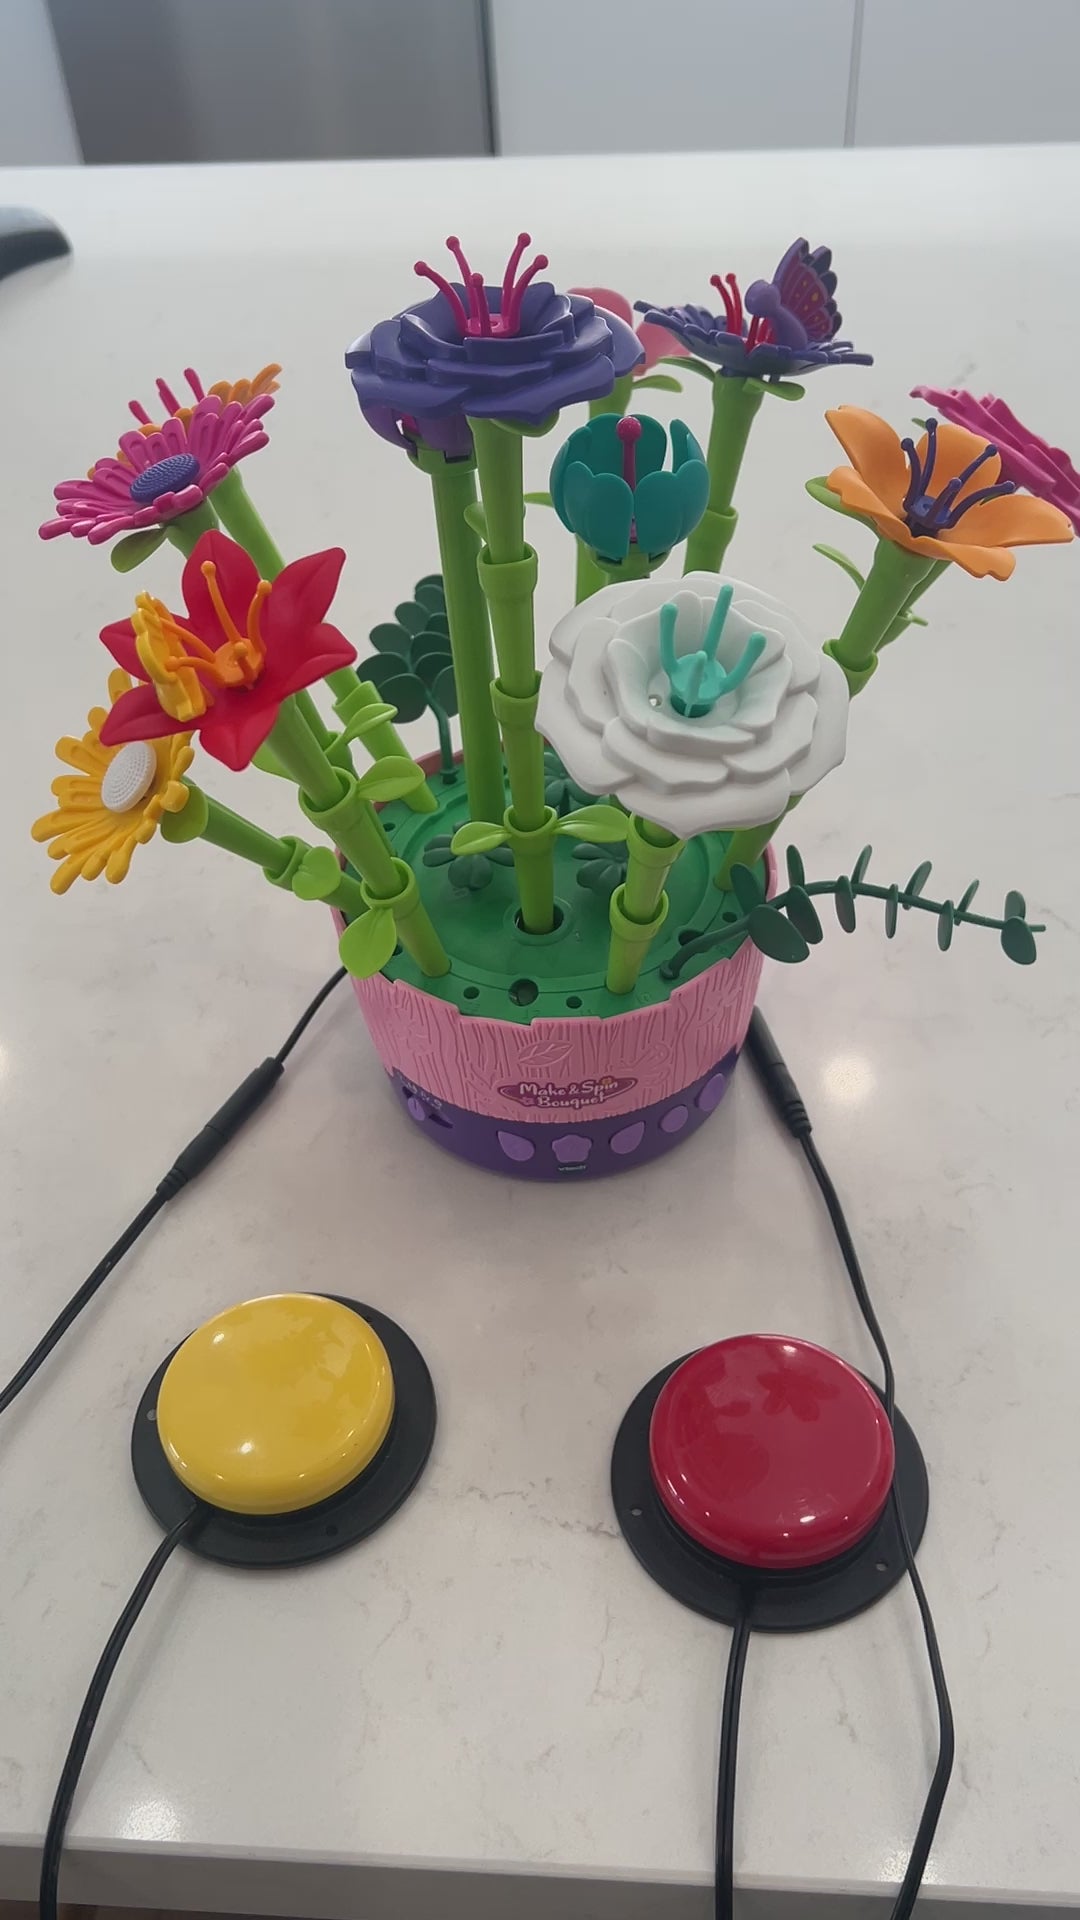 Make and Spin Bouquet - Switch Adapted – Accessible Play